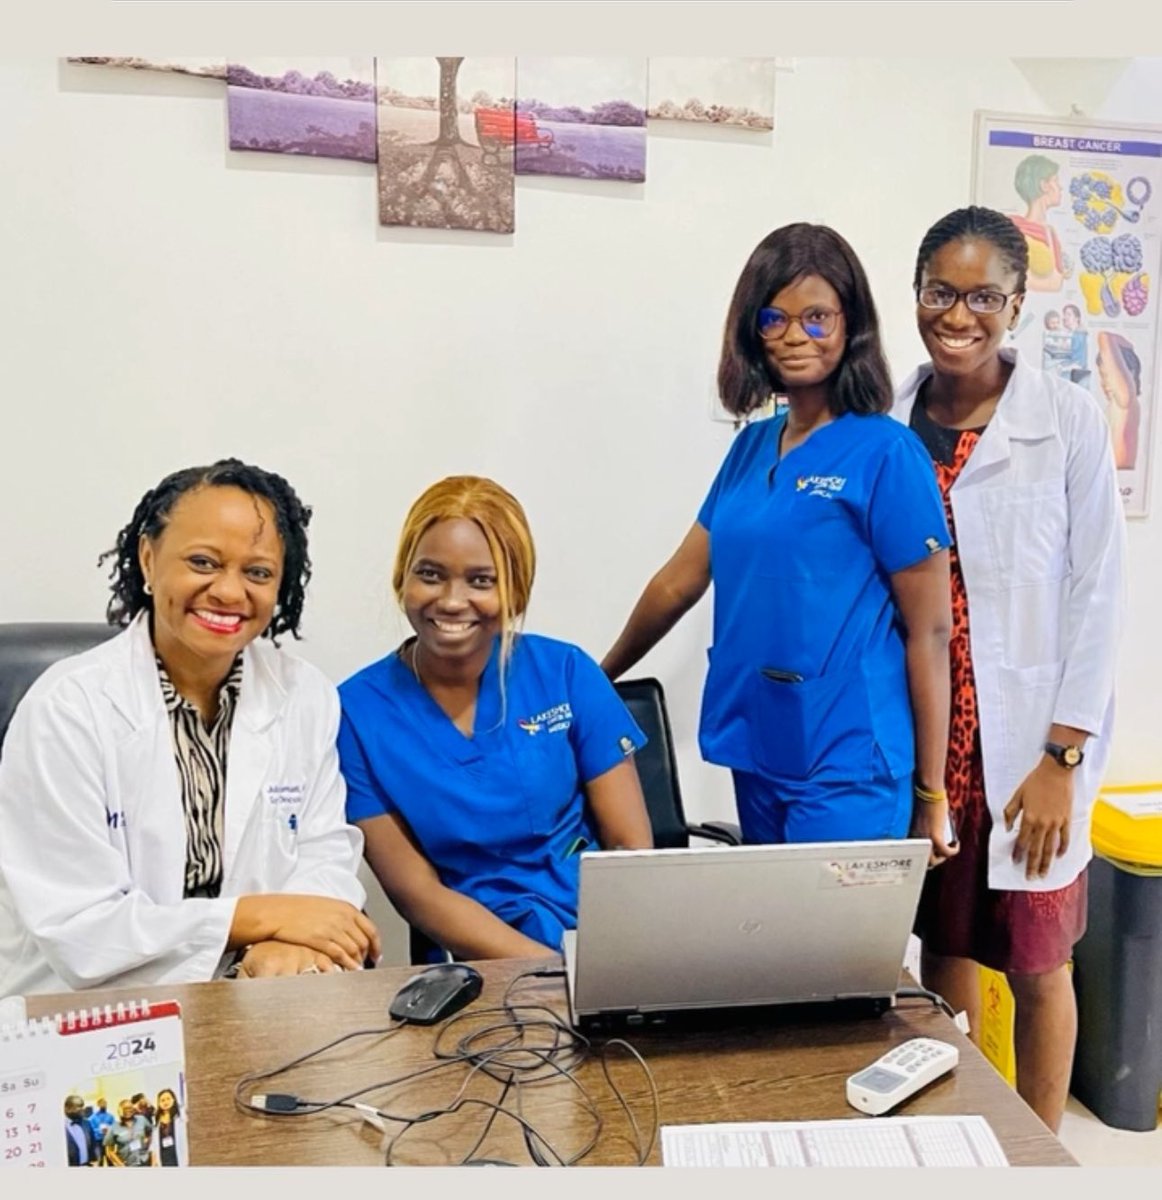 In Lagos connecting with patients & my medical officers — still making research meetings work ! My team @NMSurgery Kristina Diaz , Matt Caputo , Norah Zaza have been incredible! Happy Eid to my Muslim friends !# Changing the narrative #Globalonc @LakeshoreCancer @ArgoResearch